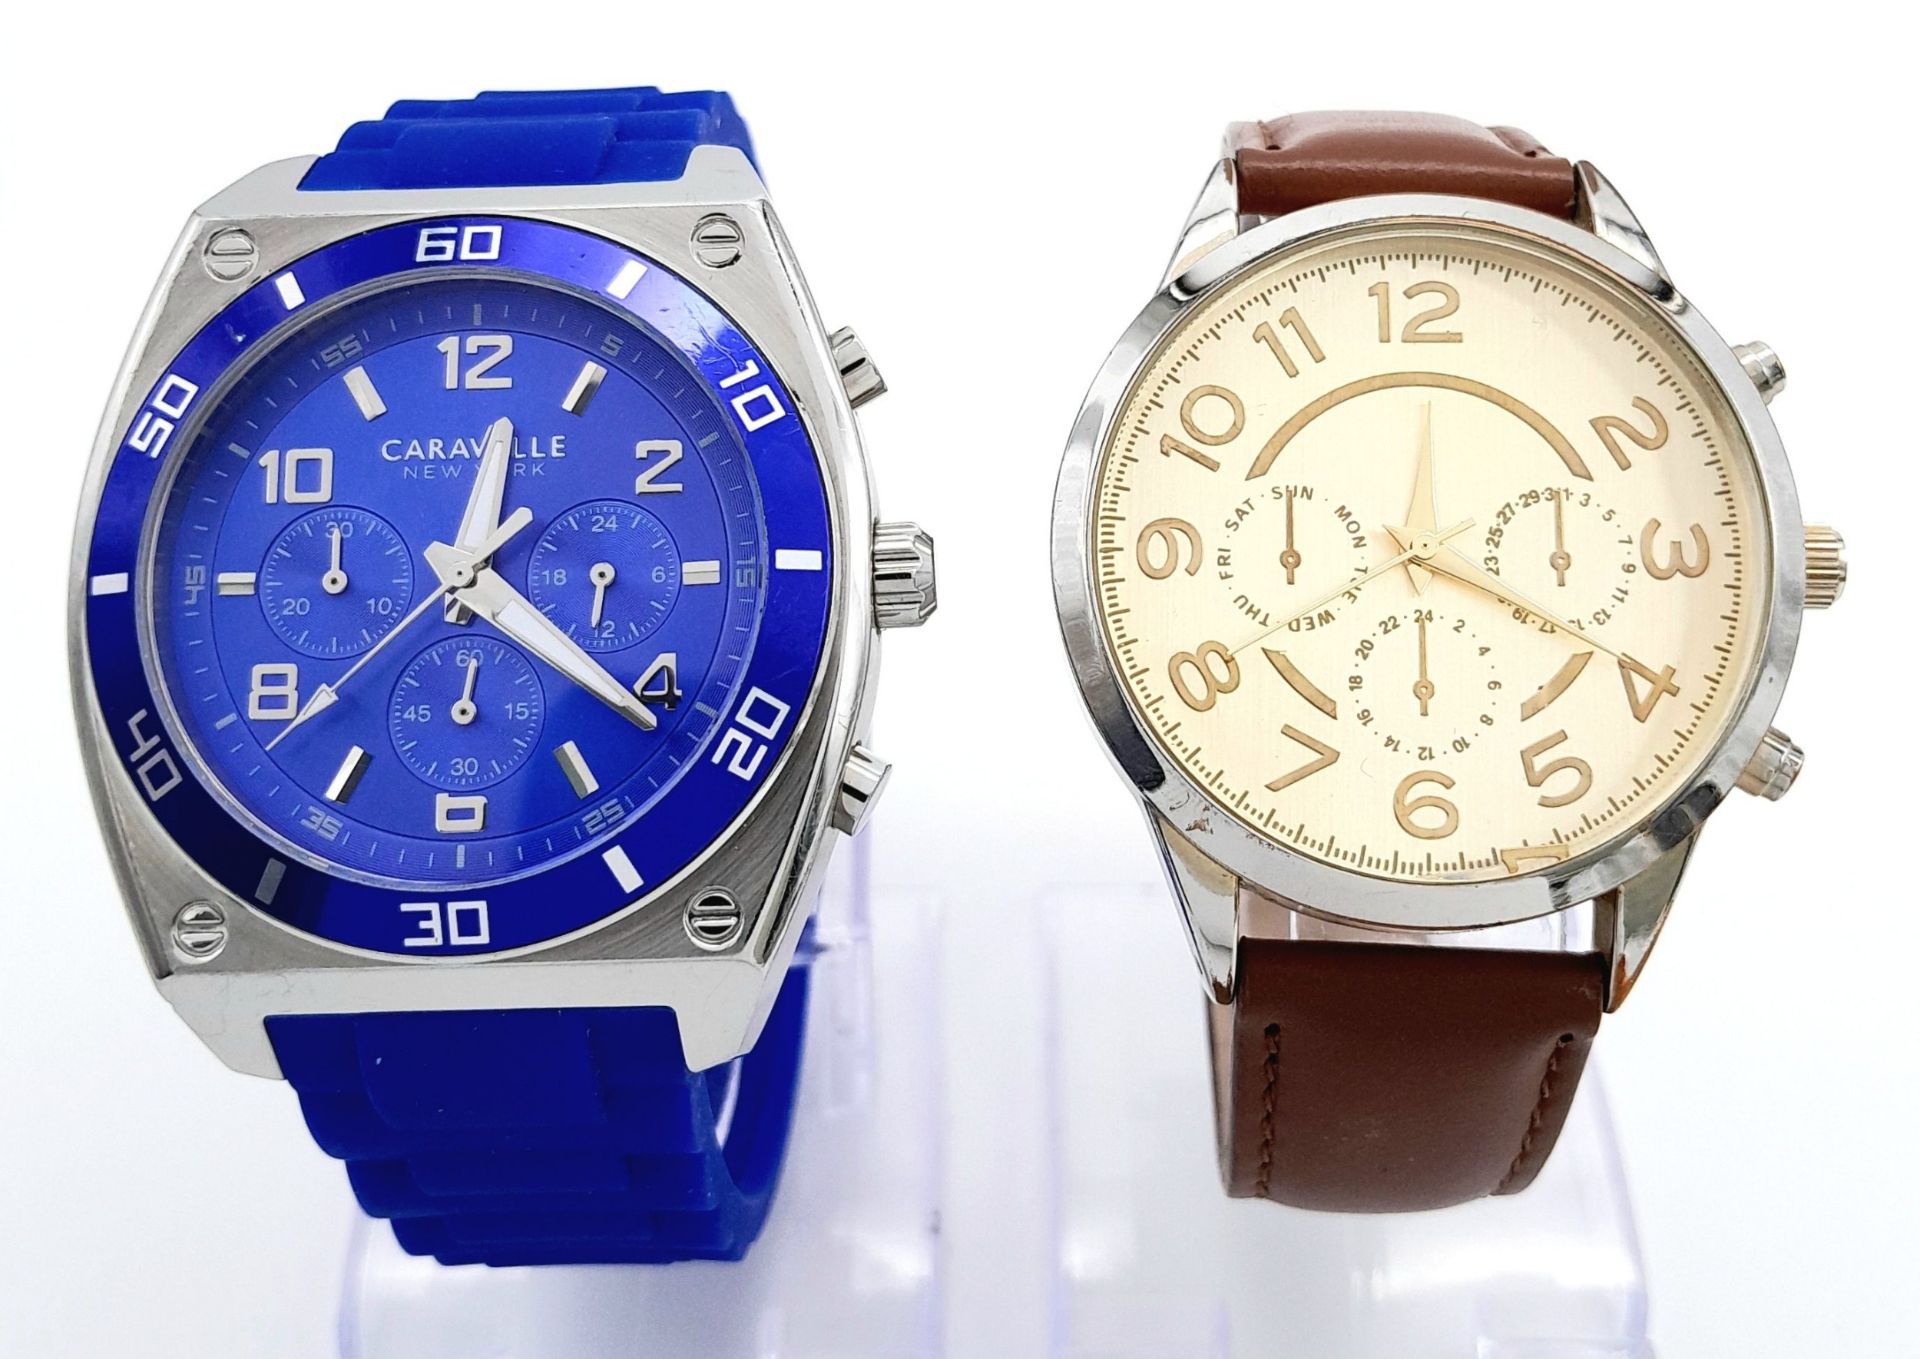 Two Men’s Quartz Watches, Comprising: 1) A Blue Face Chronograph Sports Watch by Caravelle New